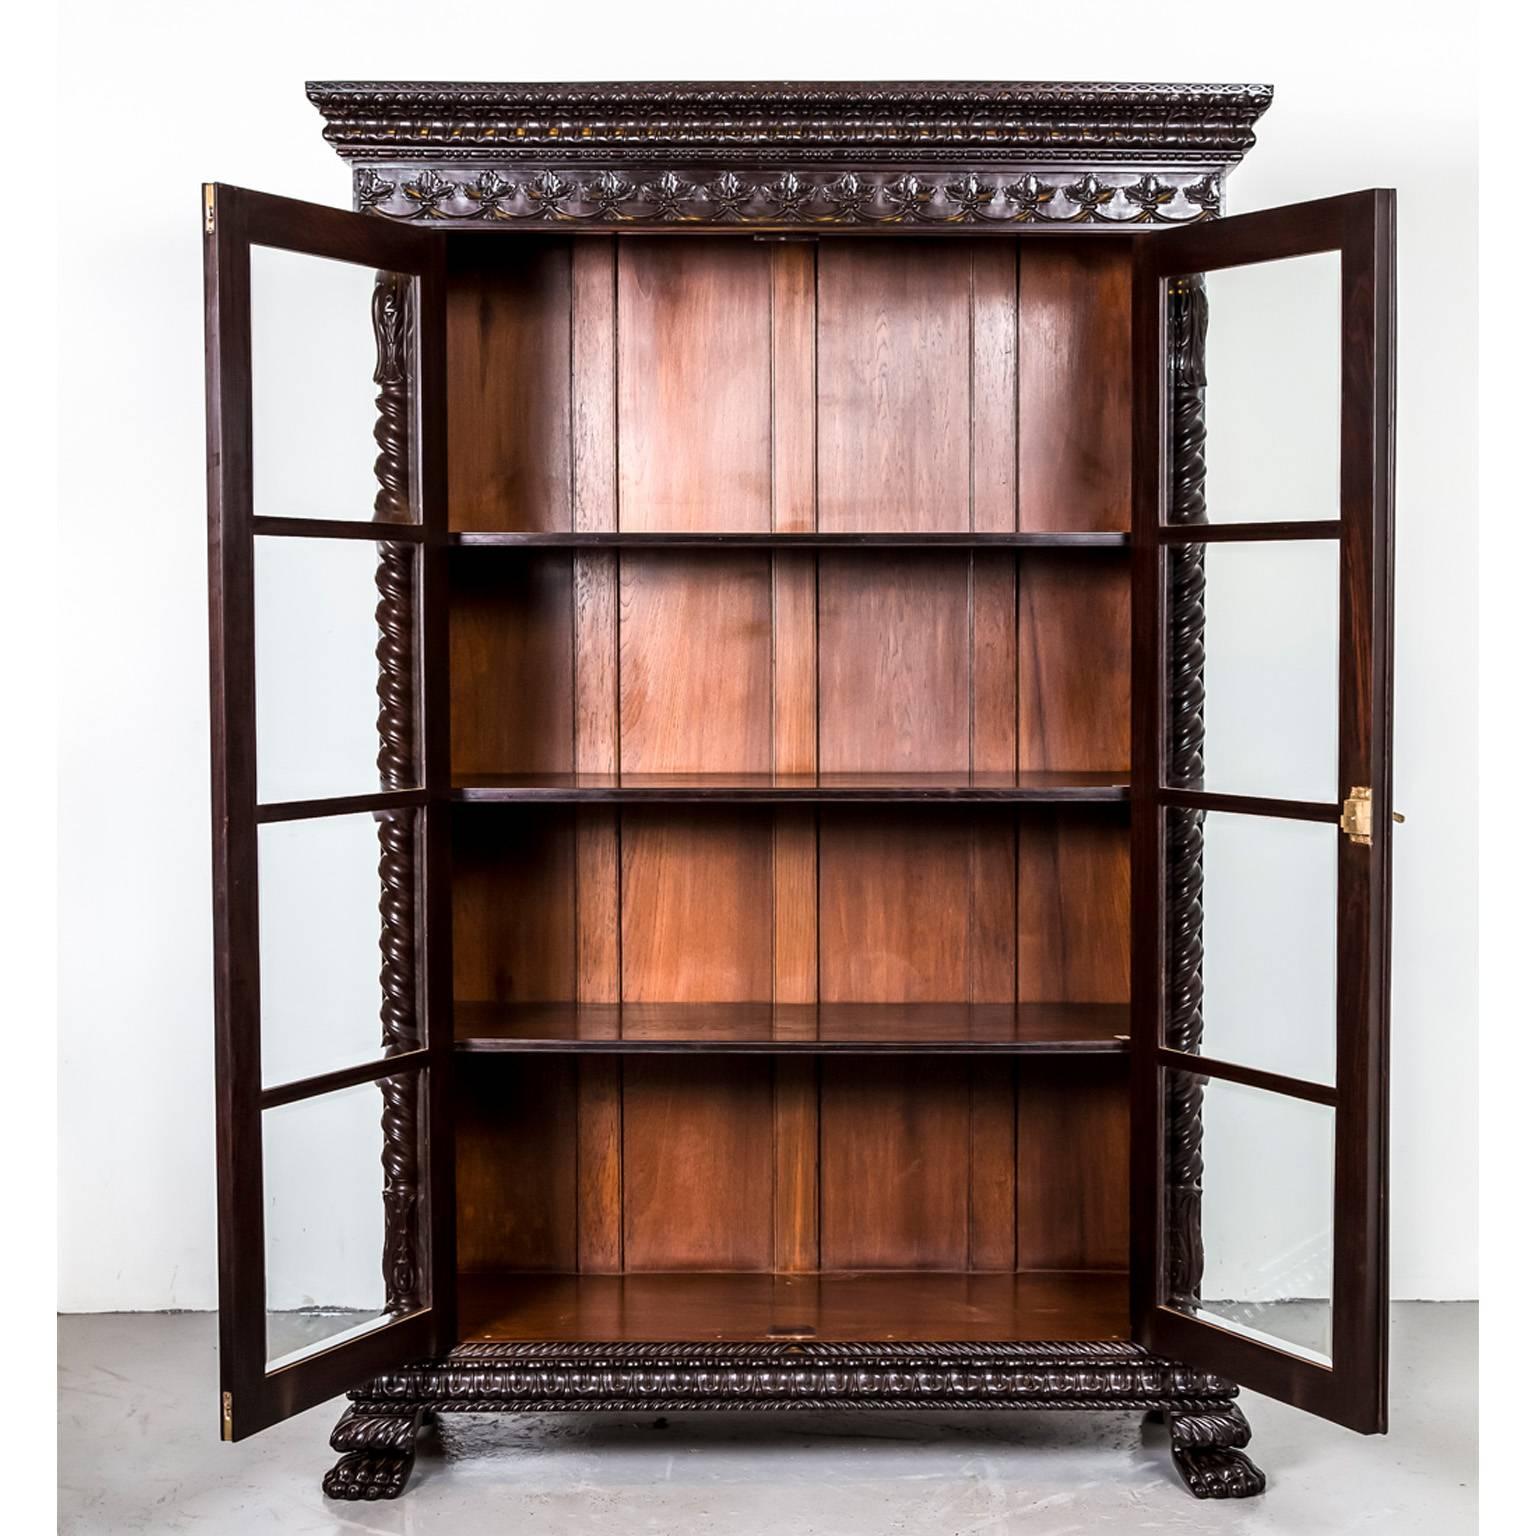 A magnificent British Colonial glass front cabinet in rosewood with a deep cornice consisting of a wide band of floral carving and egg and dart carving on the edge. The frieze is relief carved in a pattern of fleur-de-lys. 
The cabinet has double